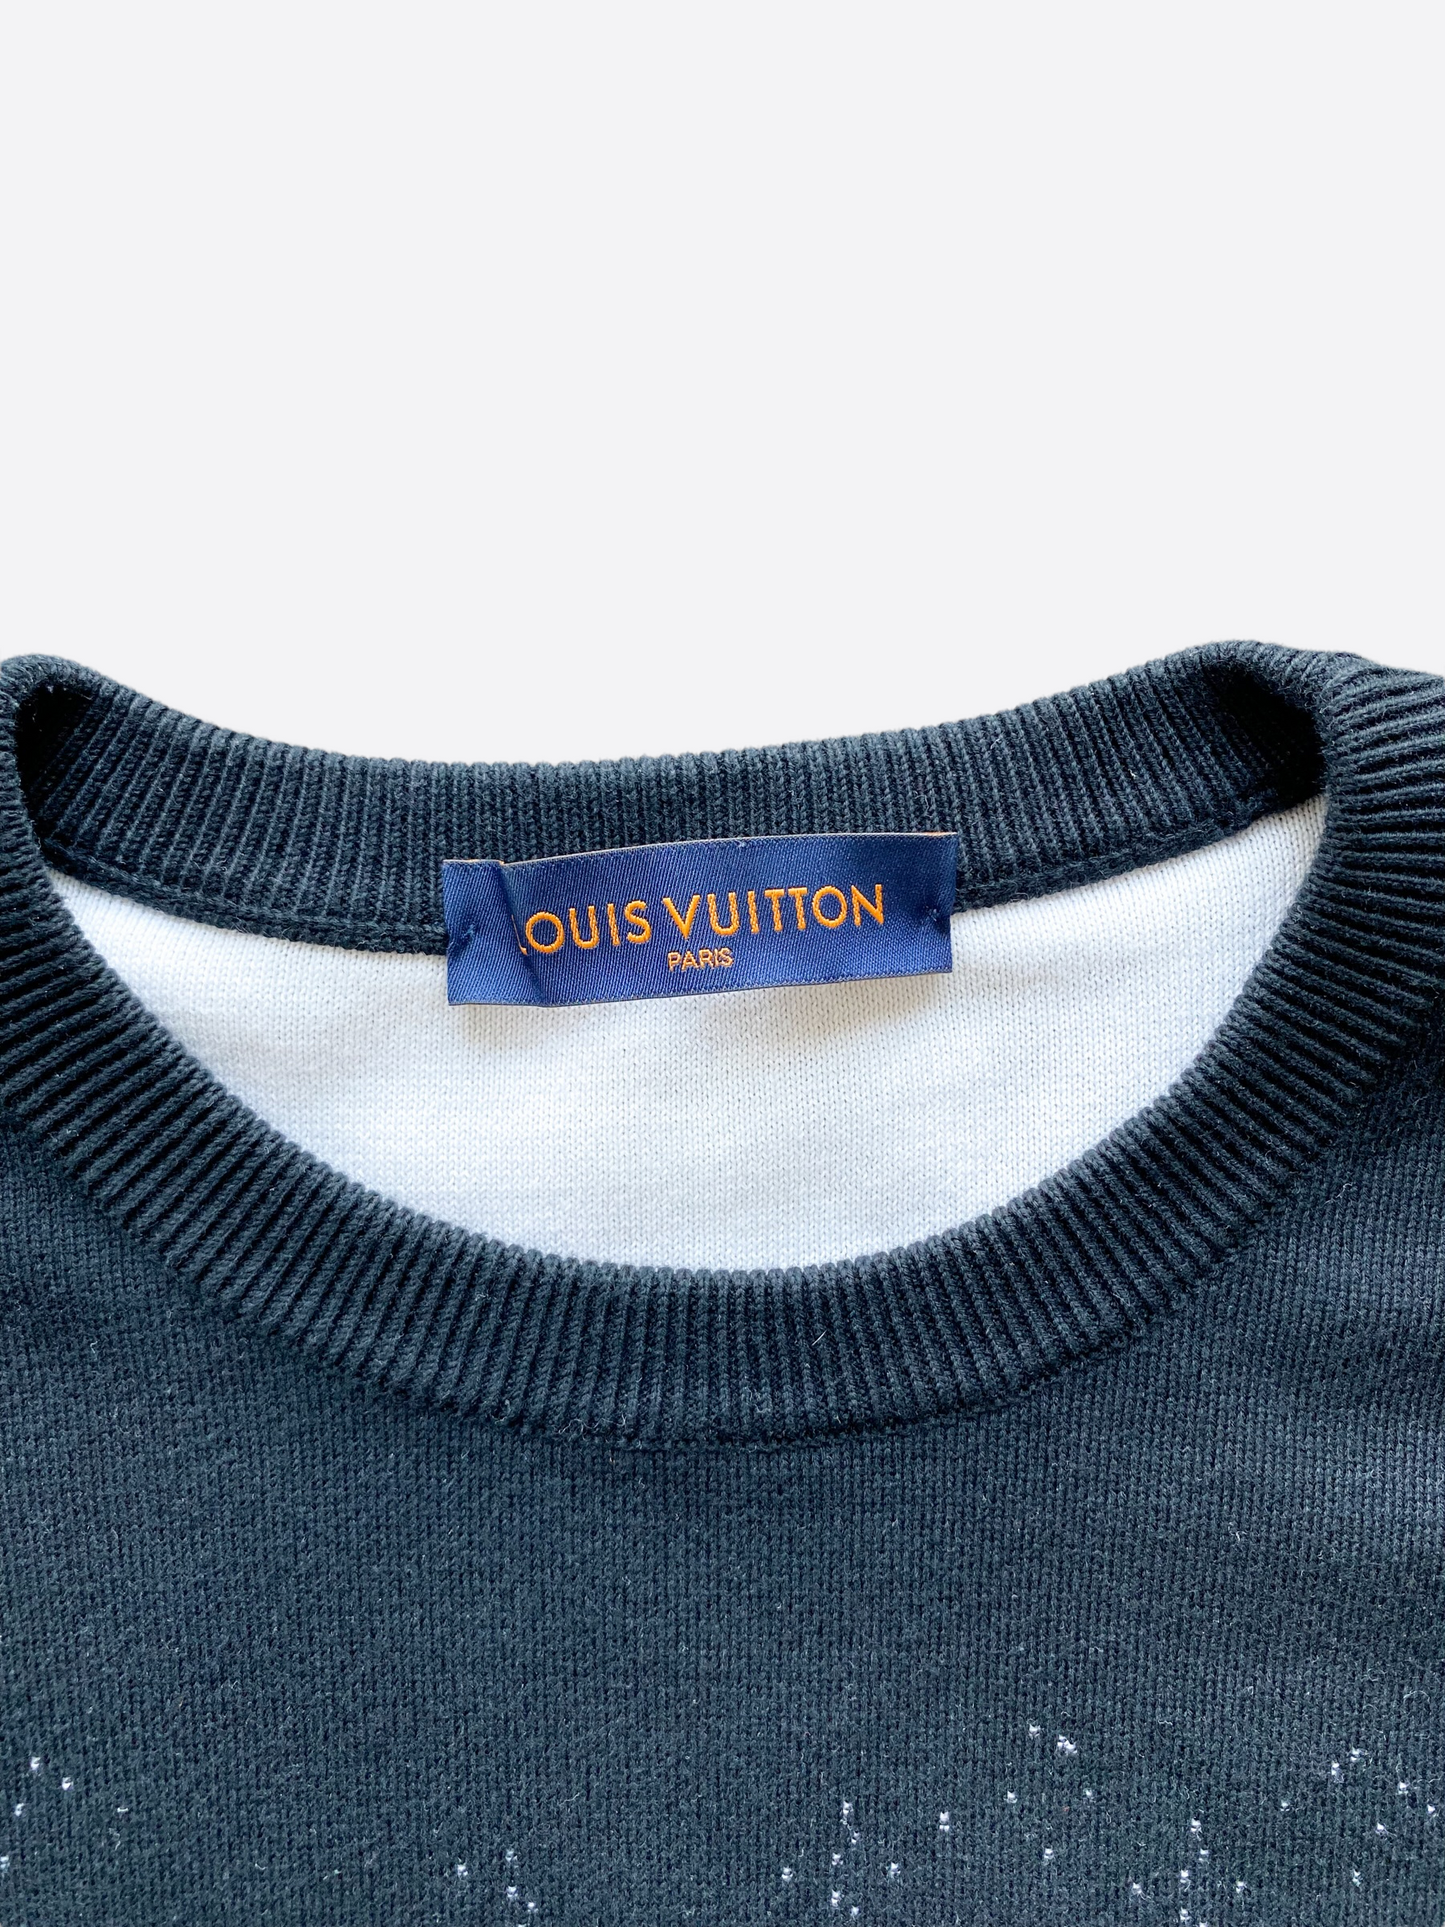 Valmerosa Fashion - It gets better every time you look at it Louis Vuitton  Gradient Monogram Sweatshirt - Bleu Canard. The perfect sweater for every  season. Black Friday sales are still live